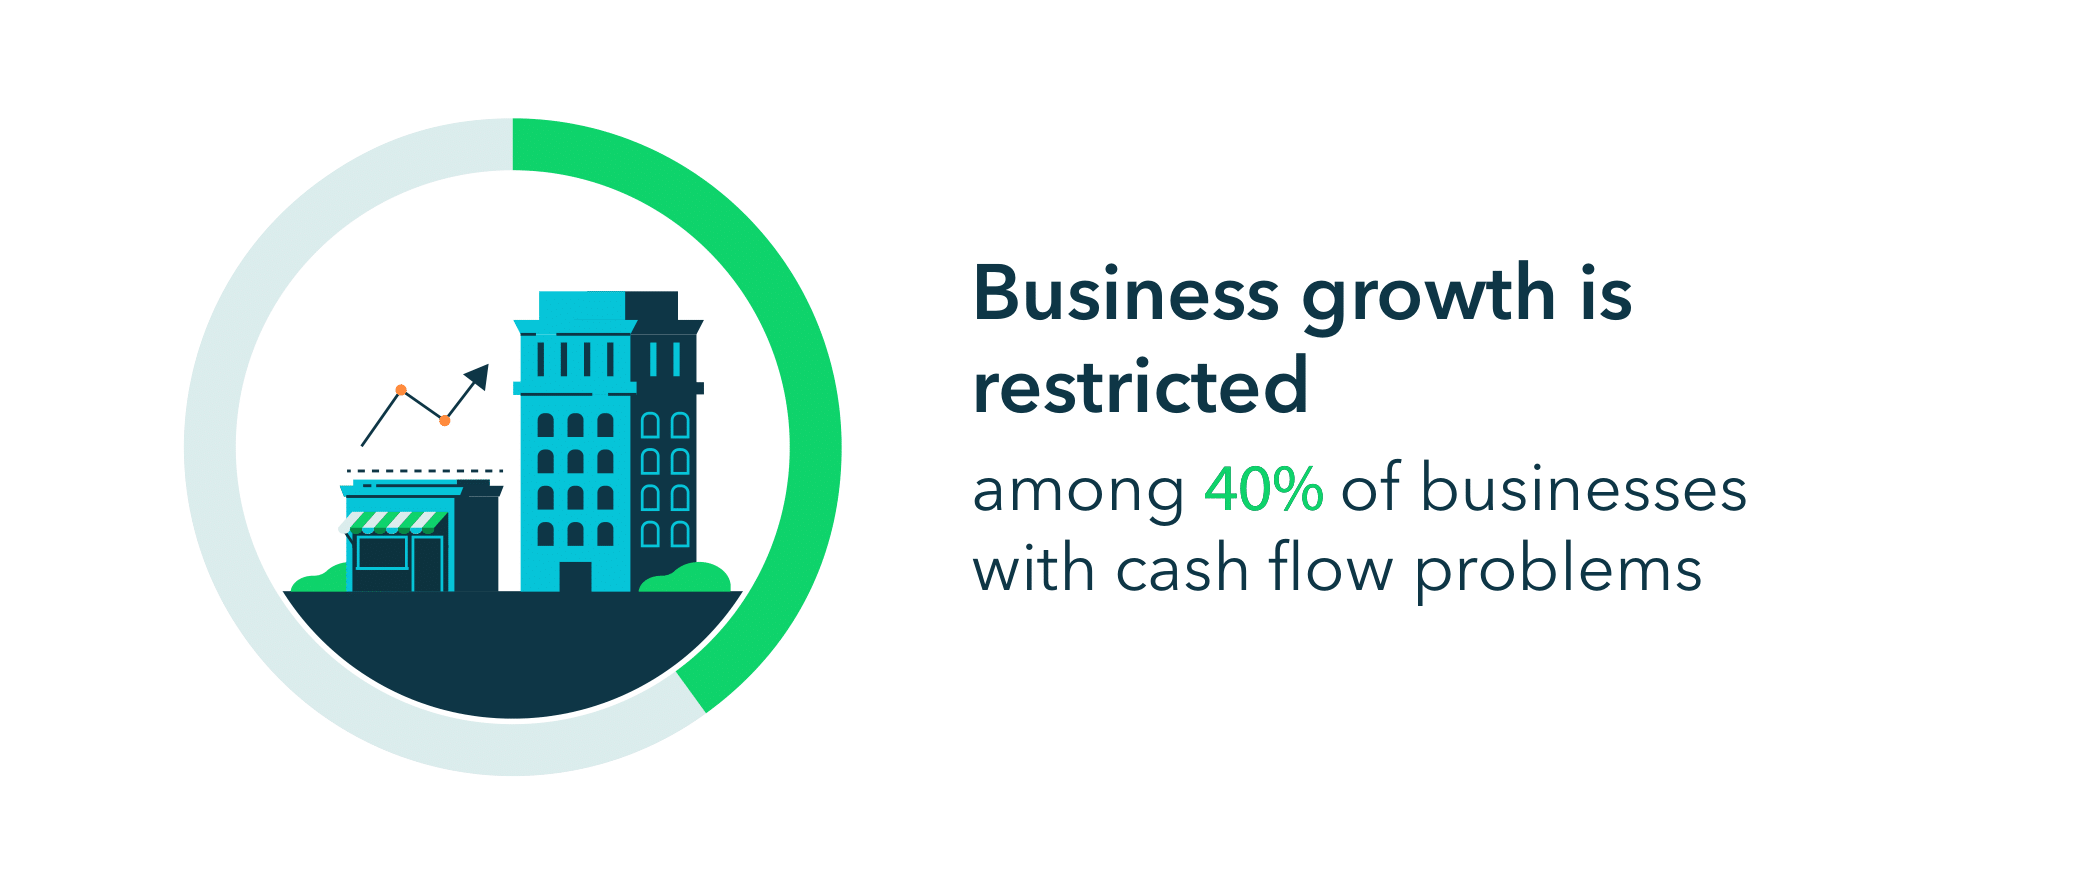 Business growth is restricted among 40% of businesses with cash flow problems.